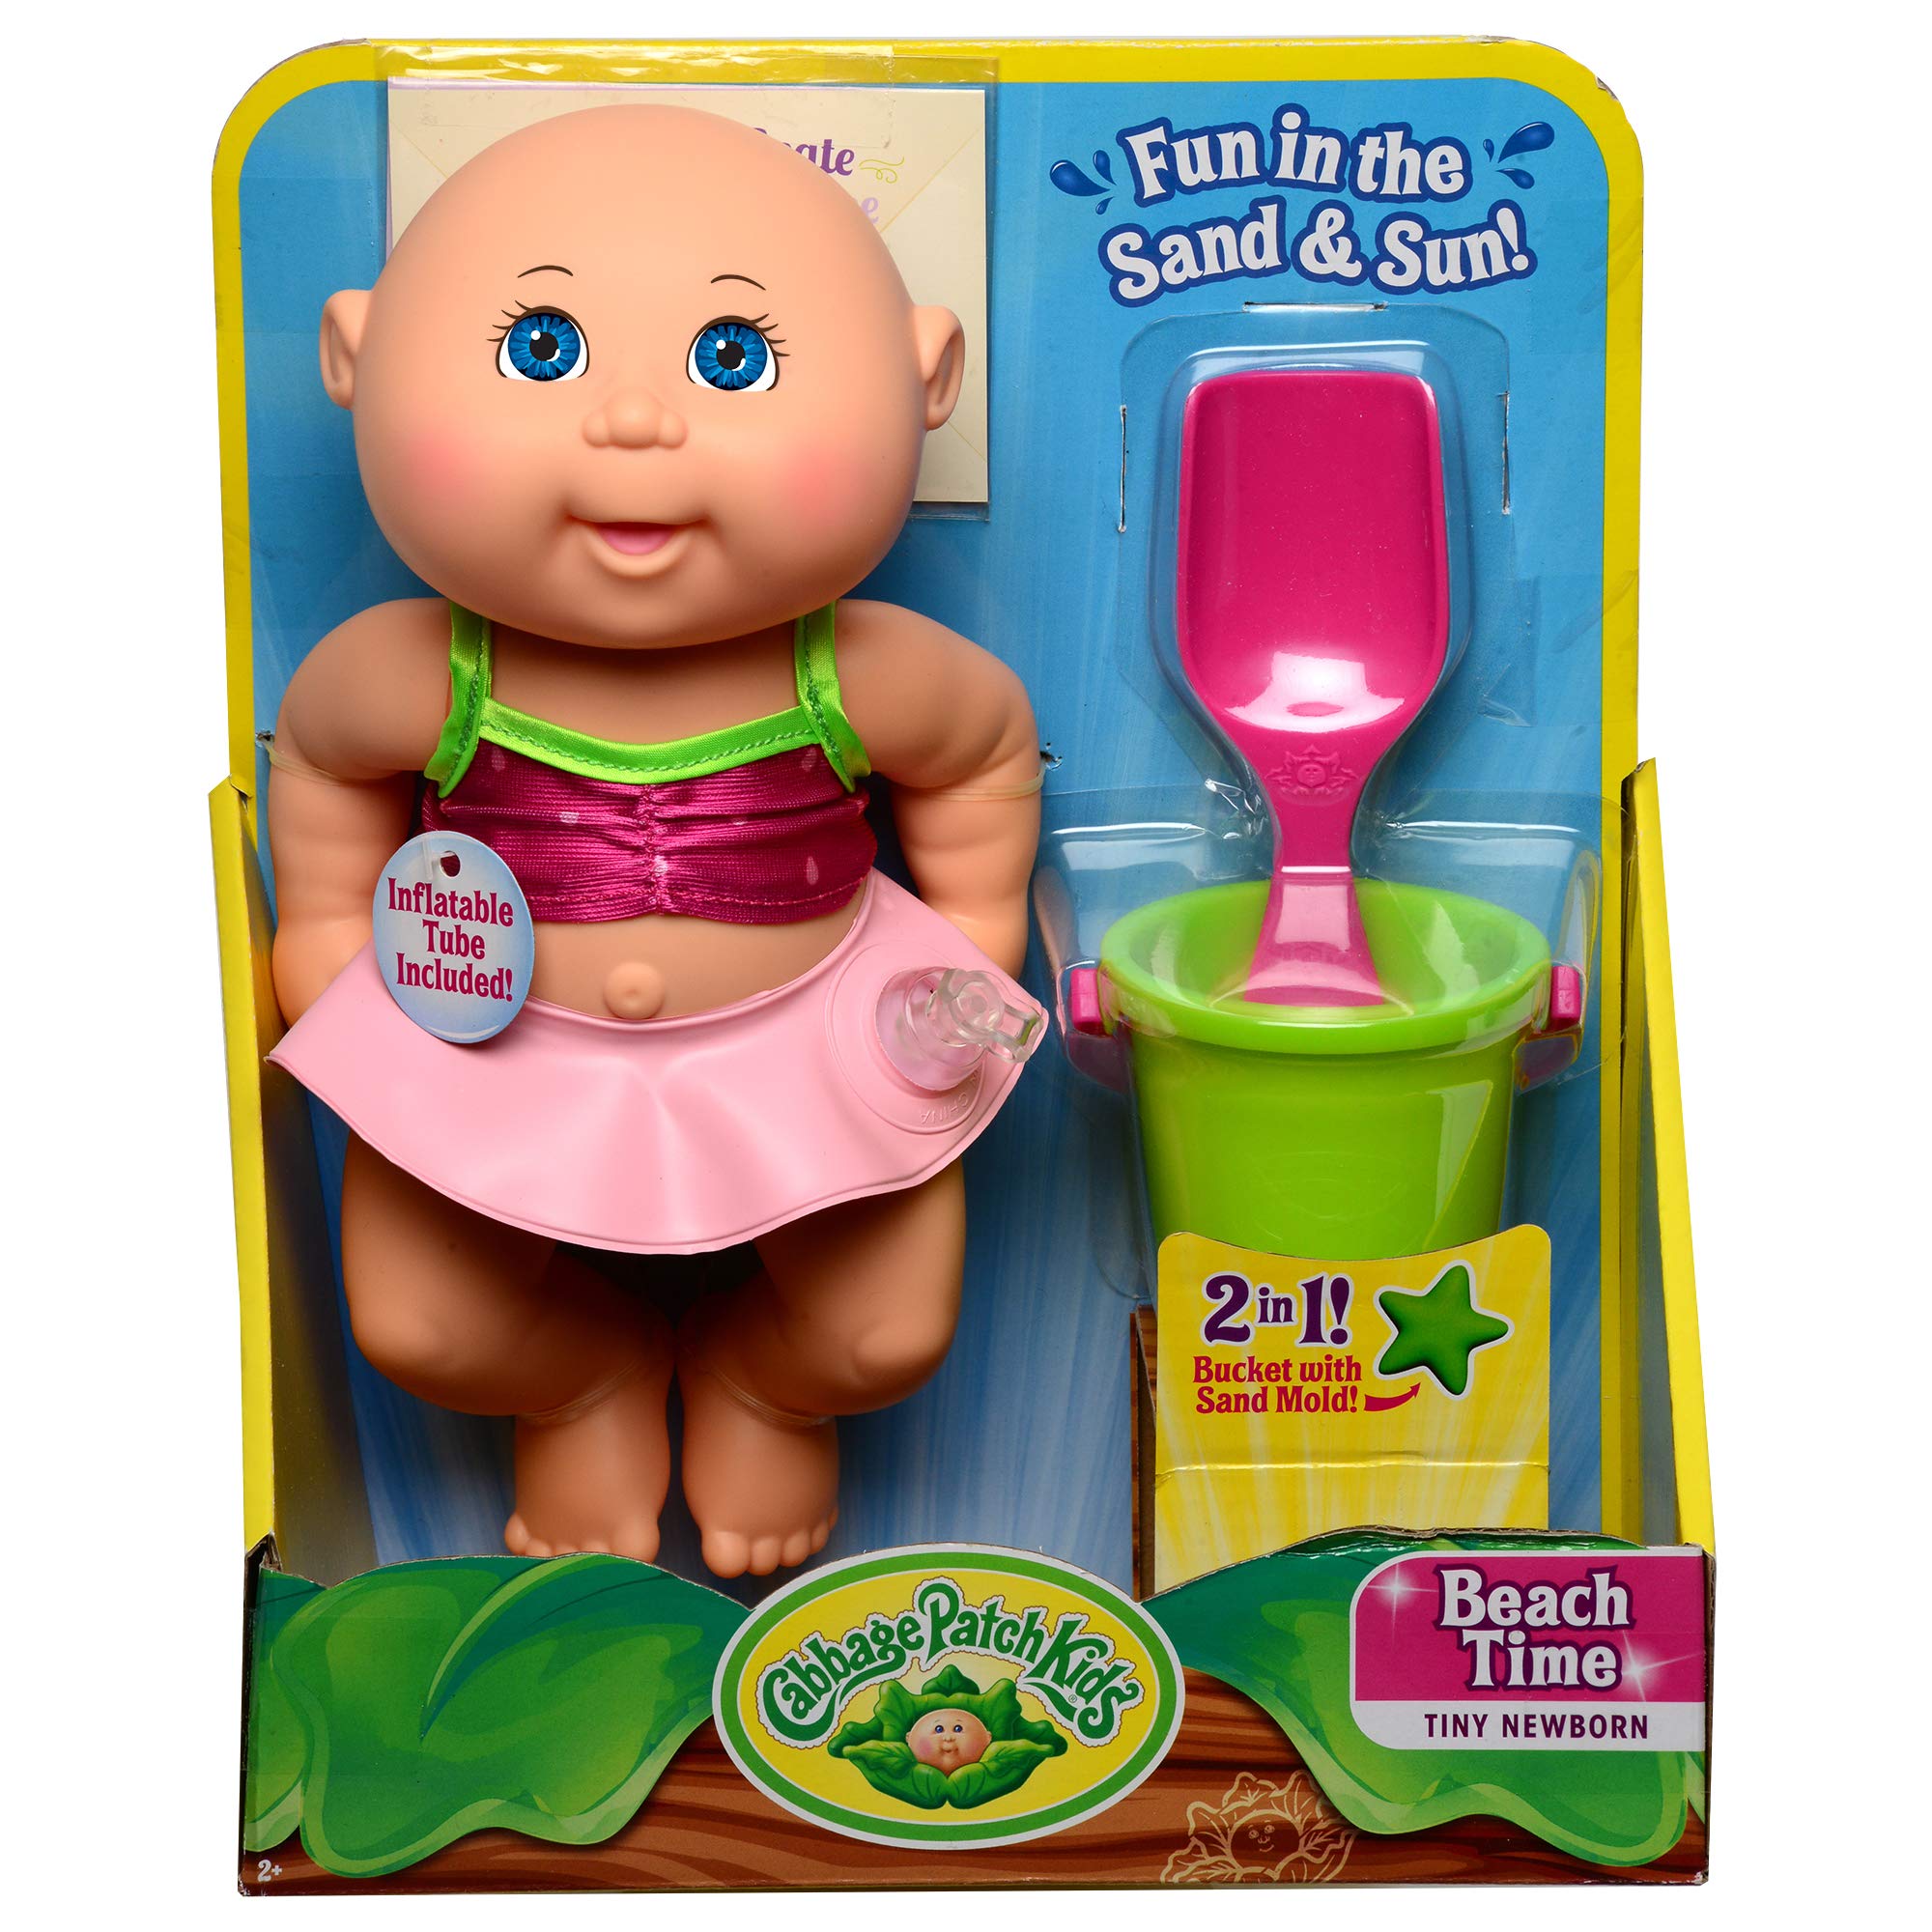 Cabbage Patch Kids Beach Time Tiny Newborn with Pink Toy Floatie, Pail and Shovel and Watermelon Swimsuit - 9 Inch CPK Dolls - Grow Your Cabbage Patch - Play in Or Out of Water